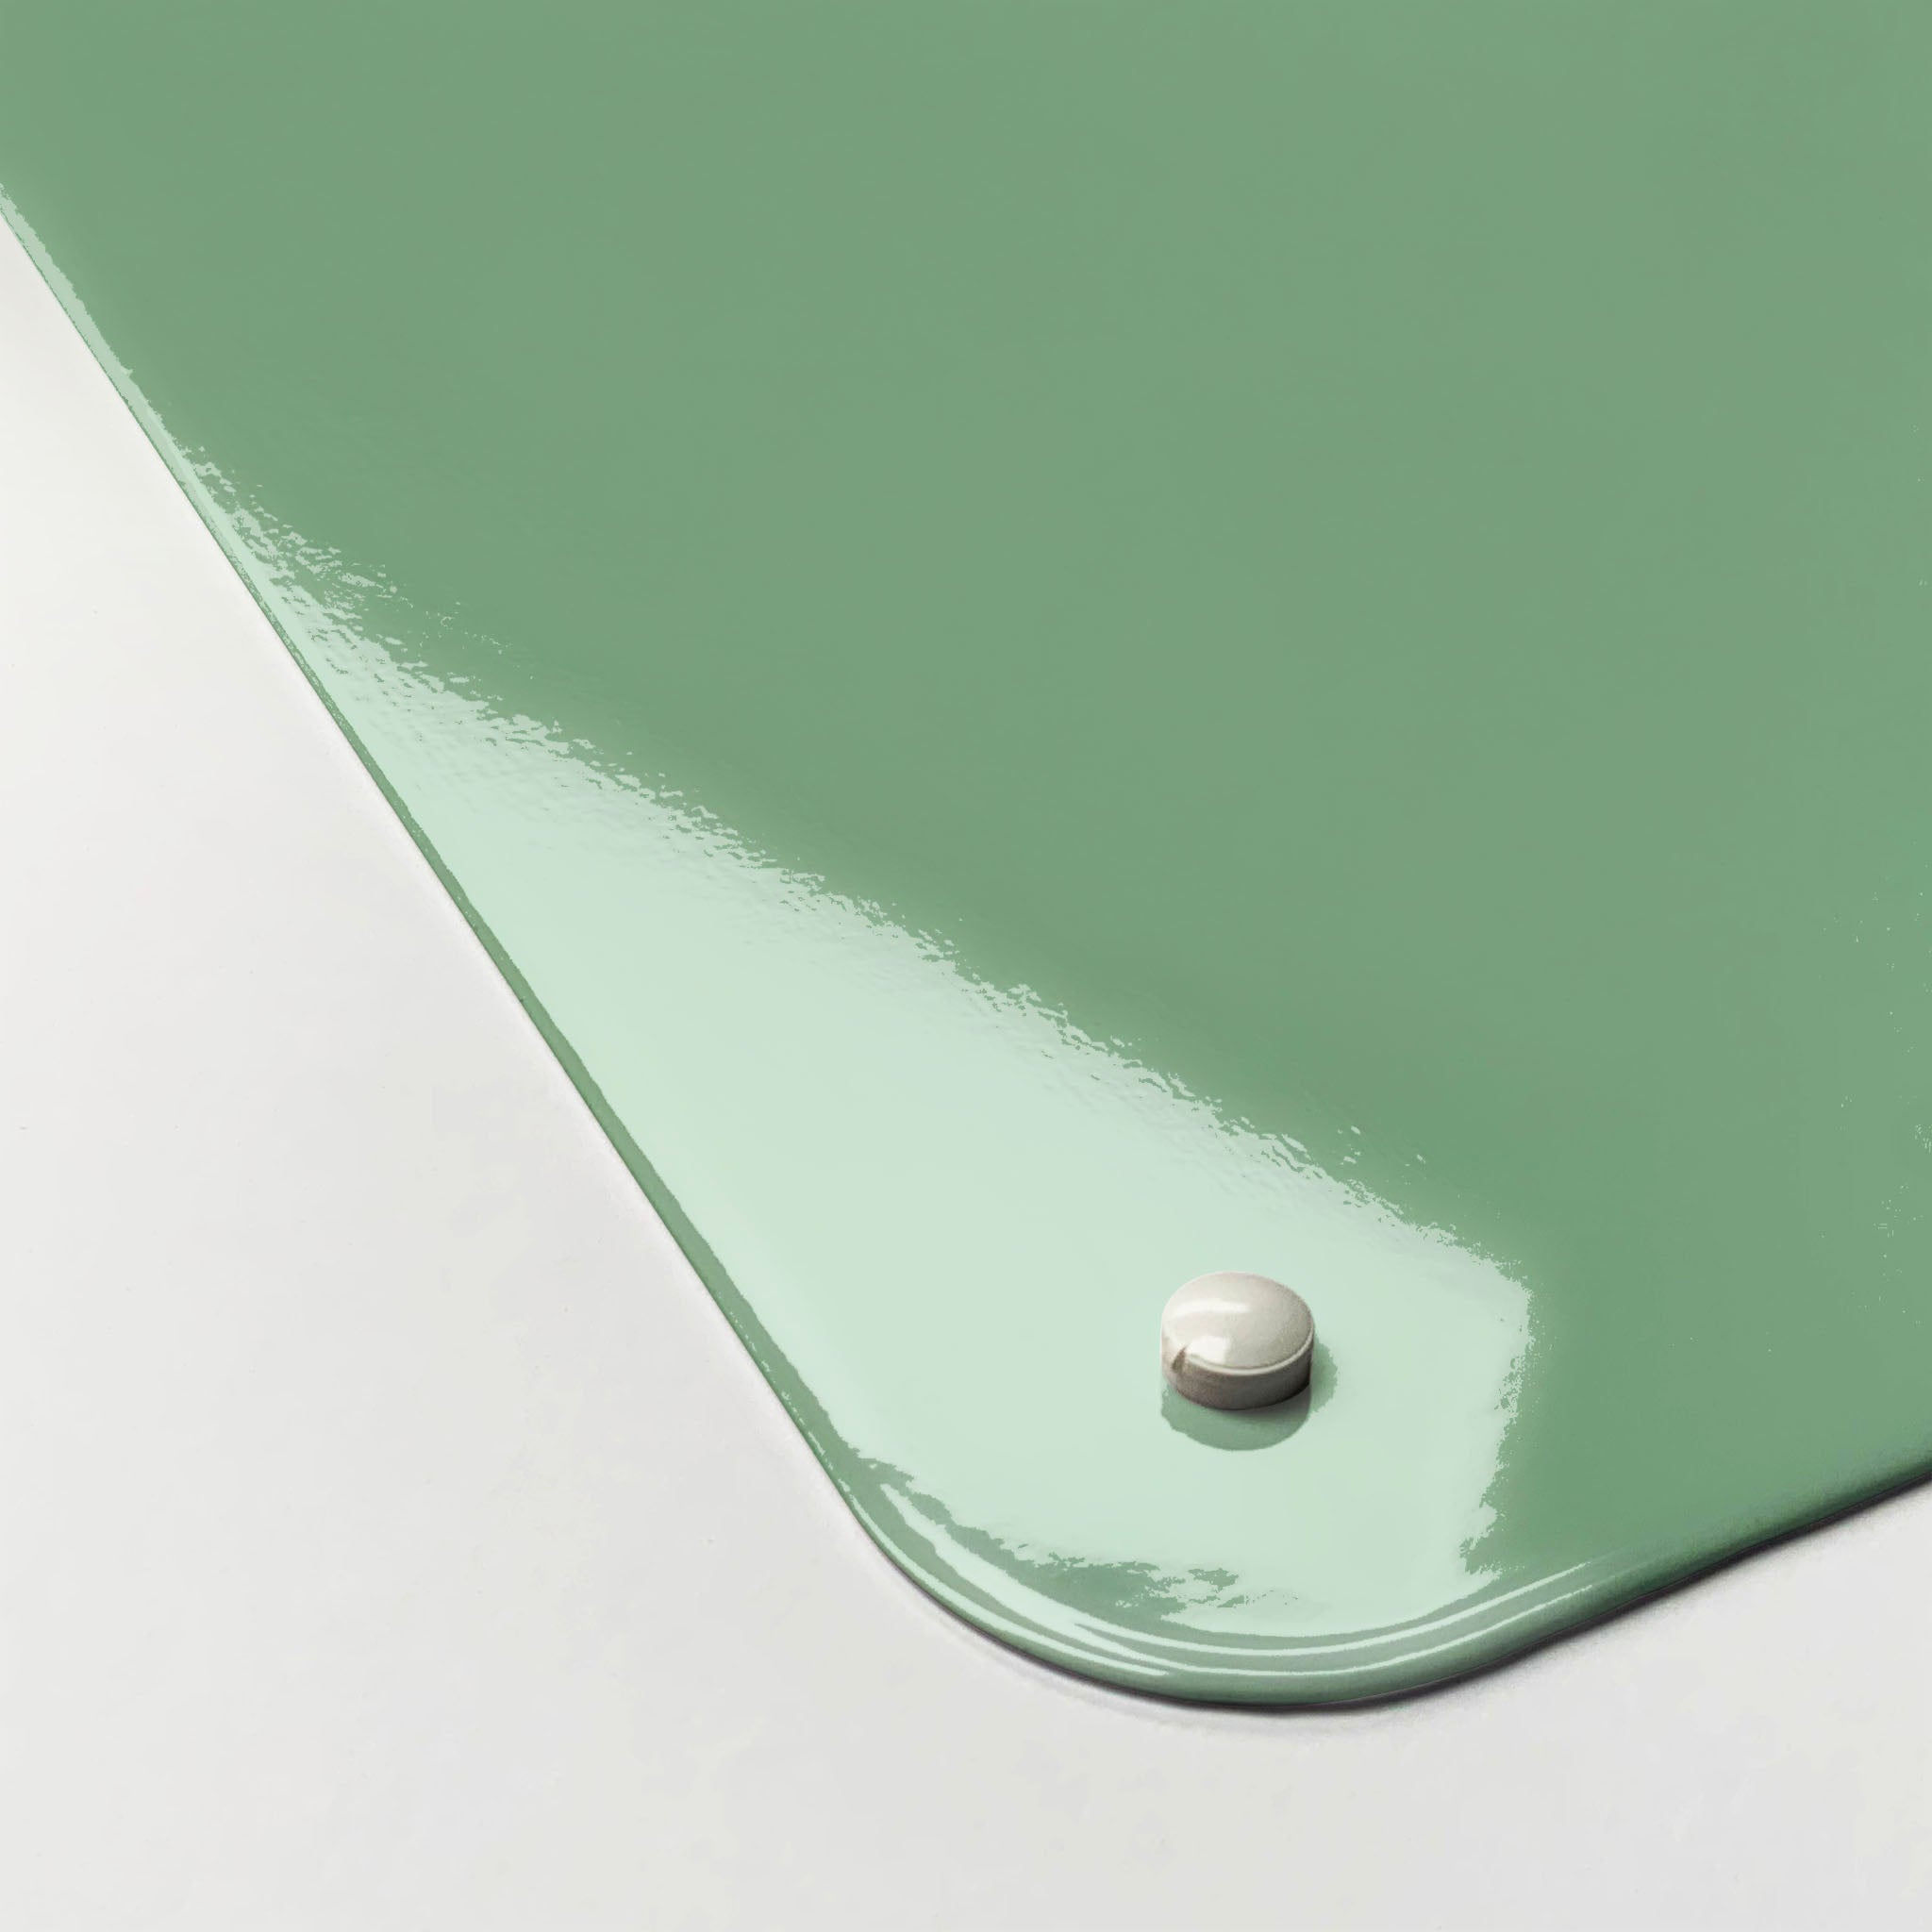 The corner detail of a plain green magnetic board to show it’s high gloss surface